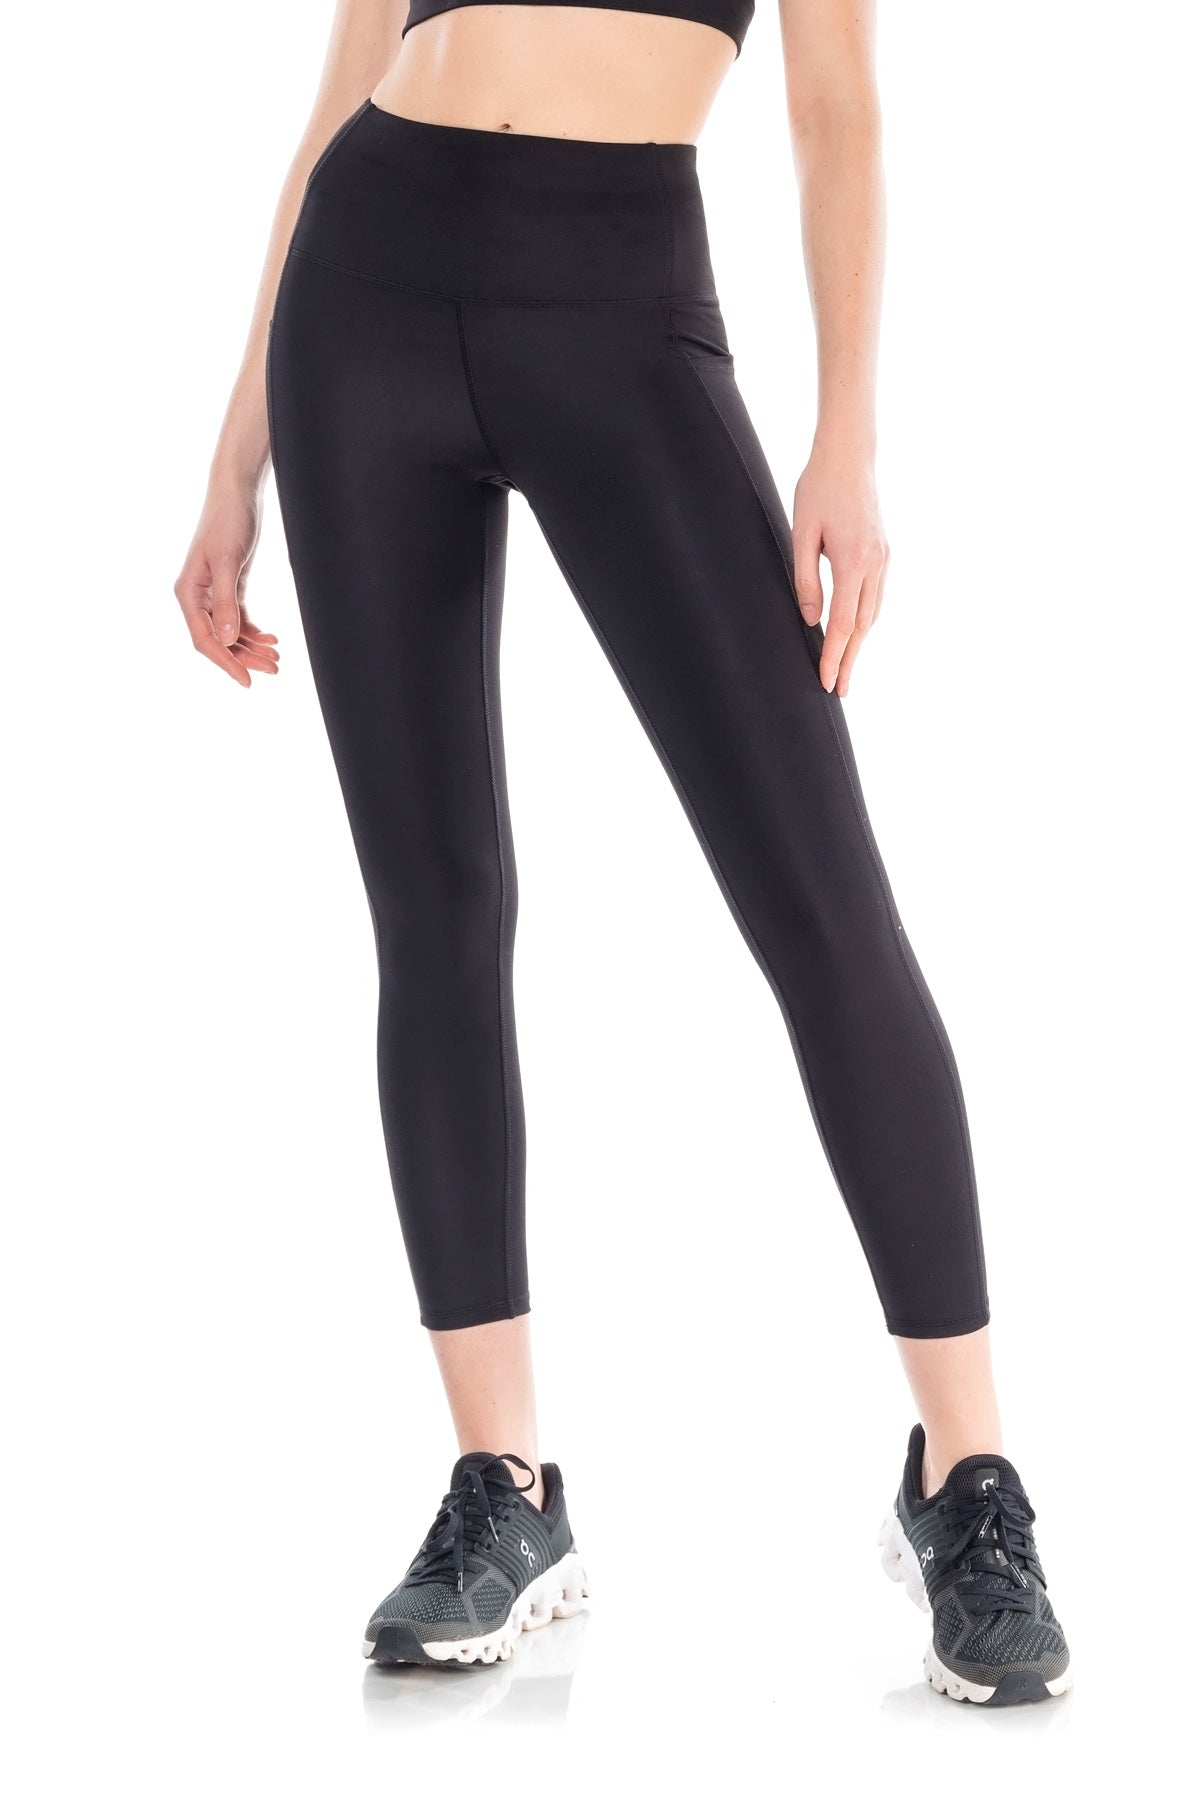 Soft Touch Sculpting Hold 7/8 Leggings Heathered Grey, High-Waisted